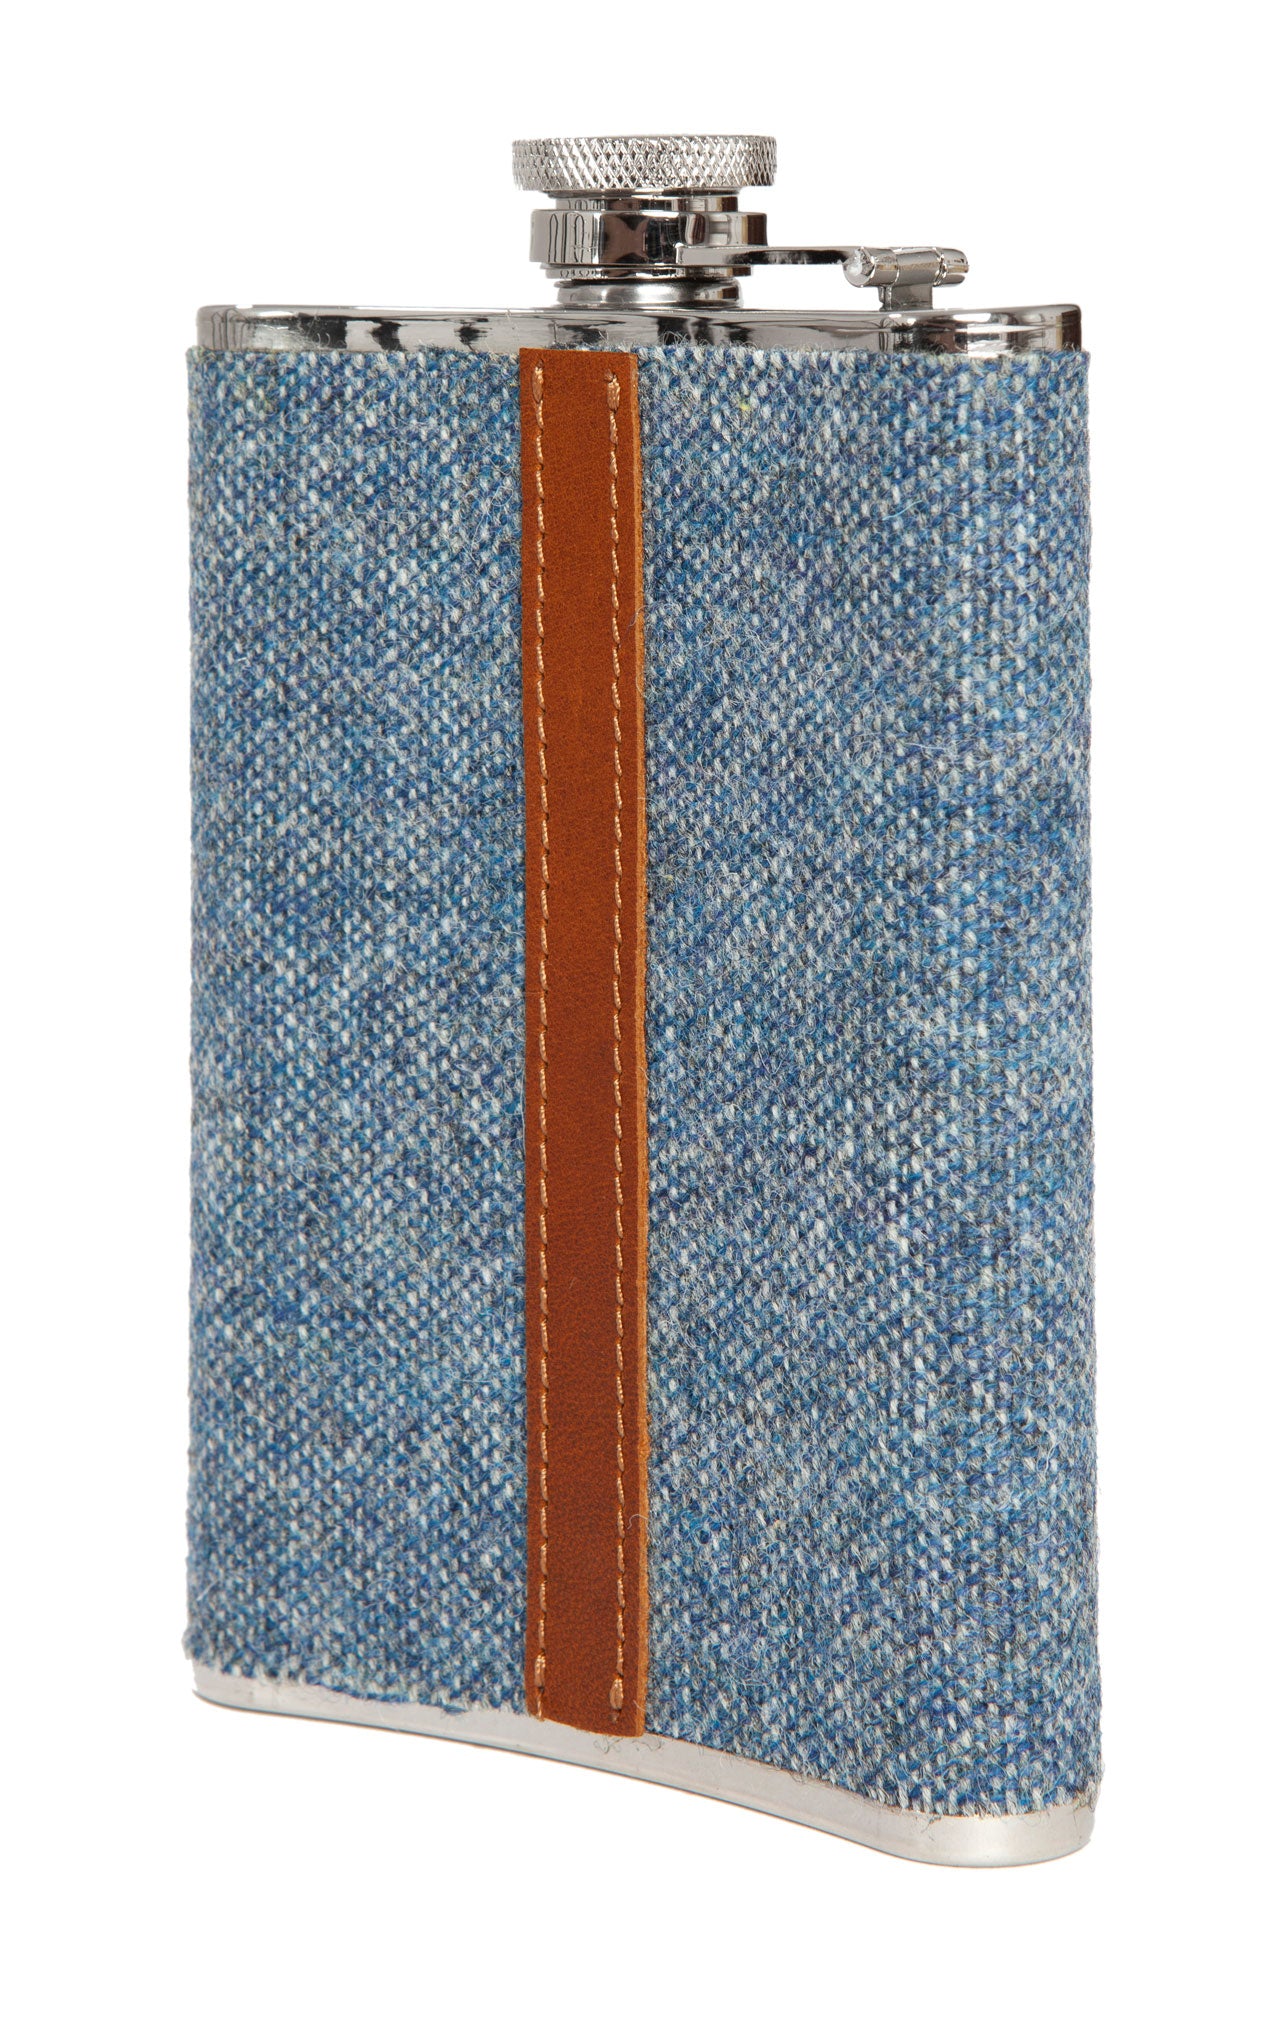 8 ounce hipflask in blue Mooncloth tweed design by Regent, featuring traditional screw closure. 